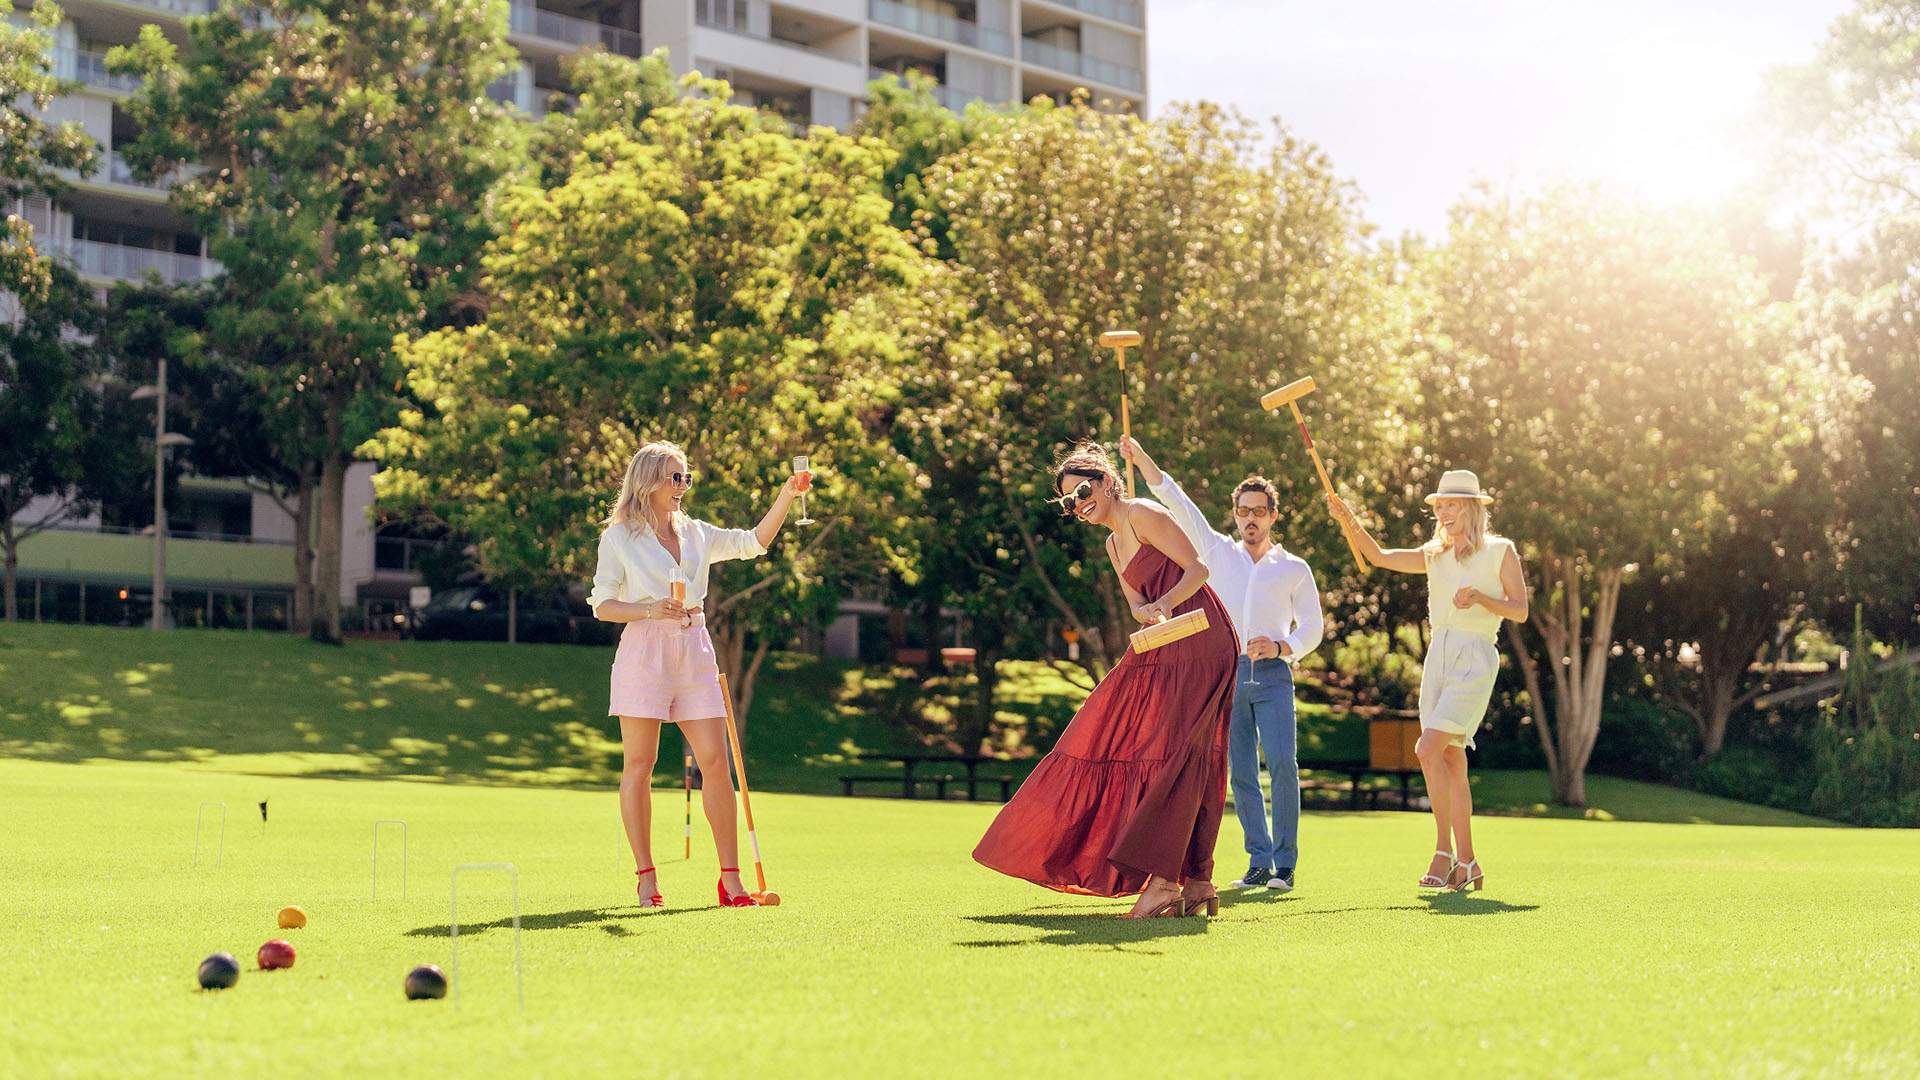 Providore Park Is the New Two-Day Food Festival with a Croquet Club That's Coming to Roma Street Parkland